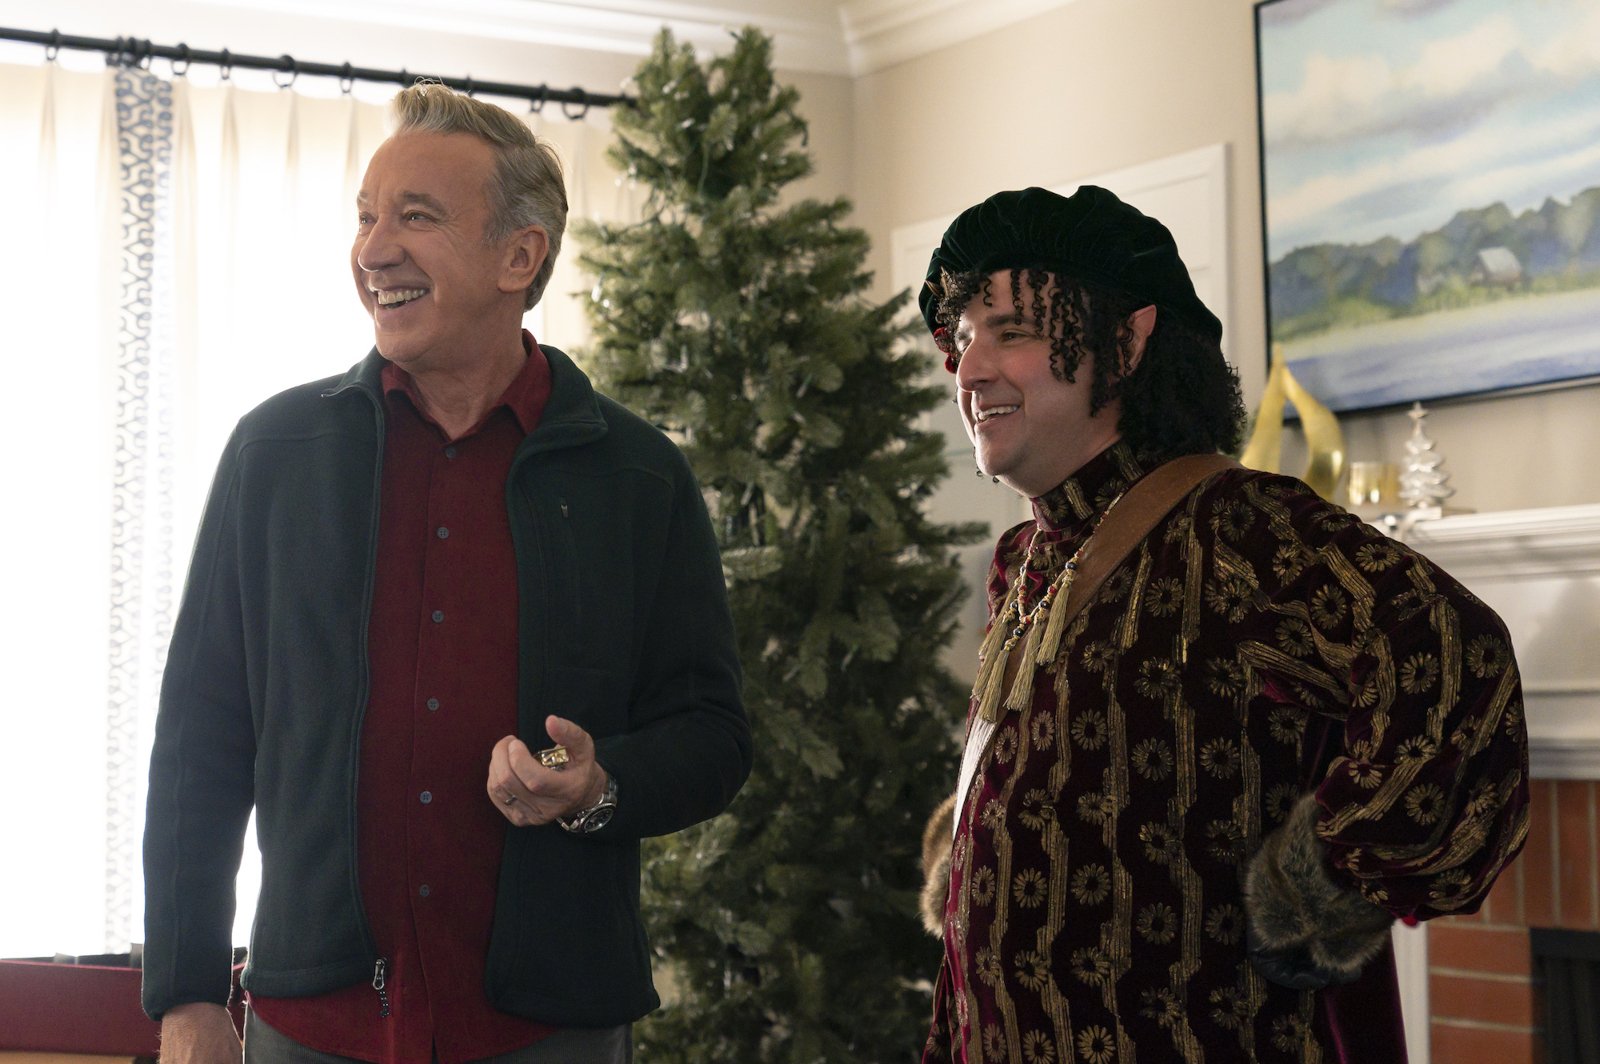 Tim Allen and David Krumholtz as Scott Calvin and Bernard in 'The Santa Clauses' for our preview of the finale, episode 6. They're standing in front of a Christmas tree and smiling.